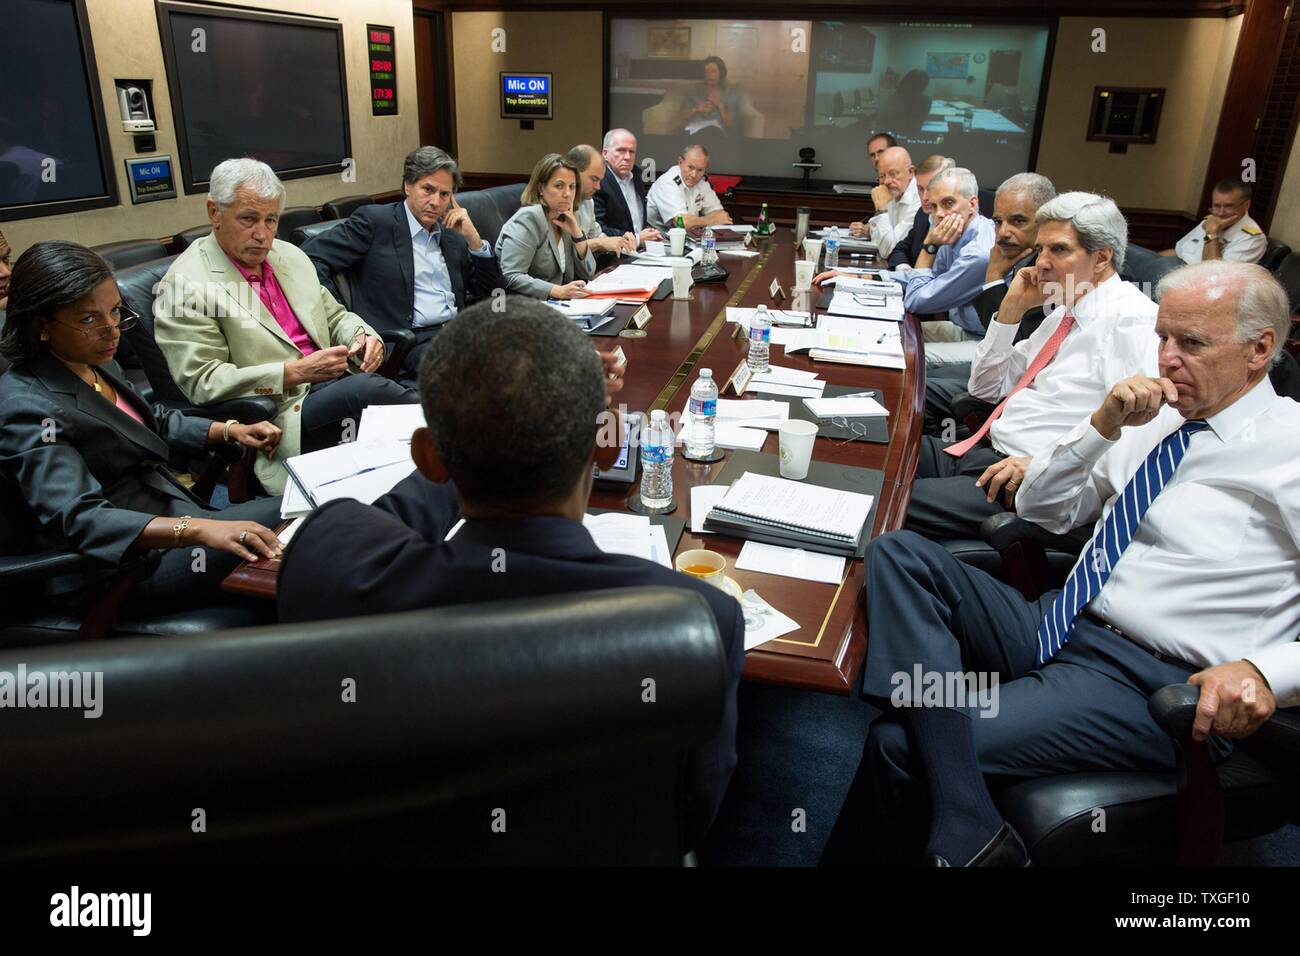 US president Obama has a video conference call in 2014 in the situation Room at the White House. To the president's left are Susan Rice (UN Ambassador, Chuck Hagel Defence secretary. To the president's right is Vice President Biden, Secretary Kerry and attorney General Eric Holder Stock Photo